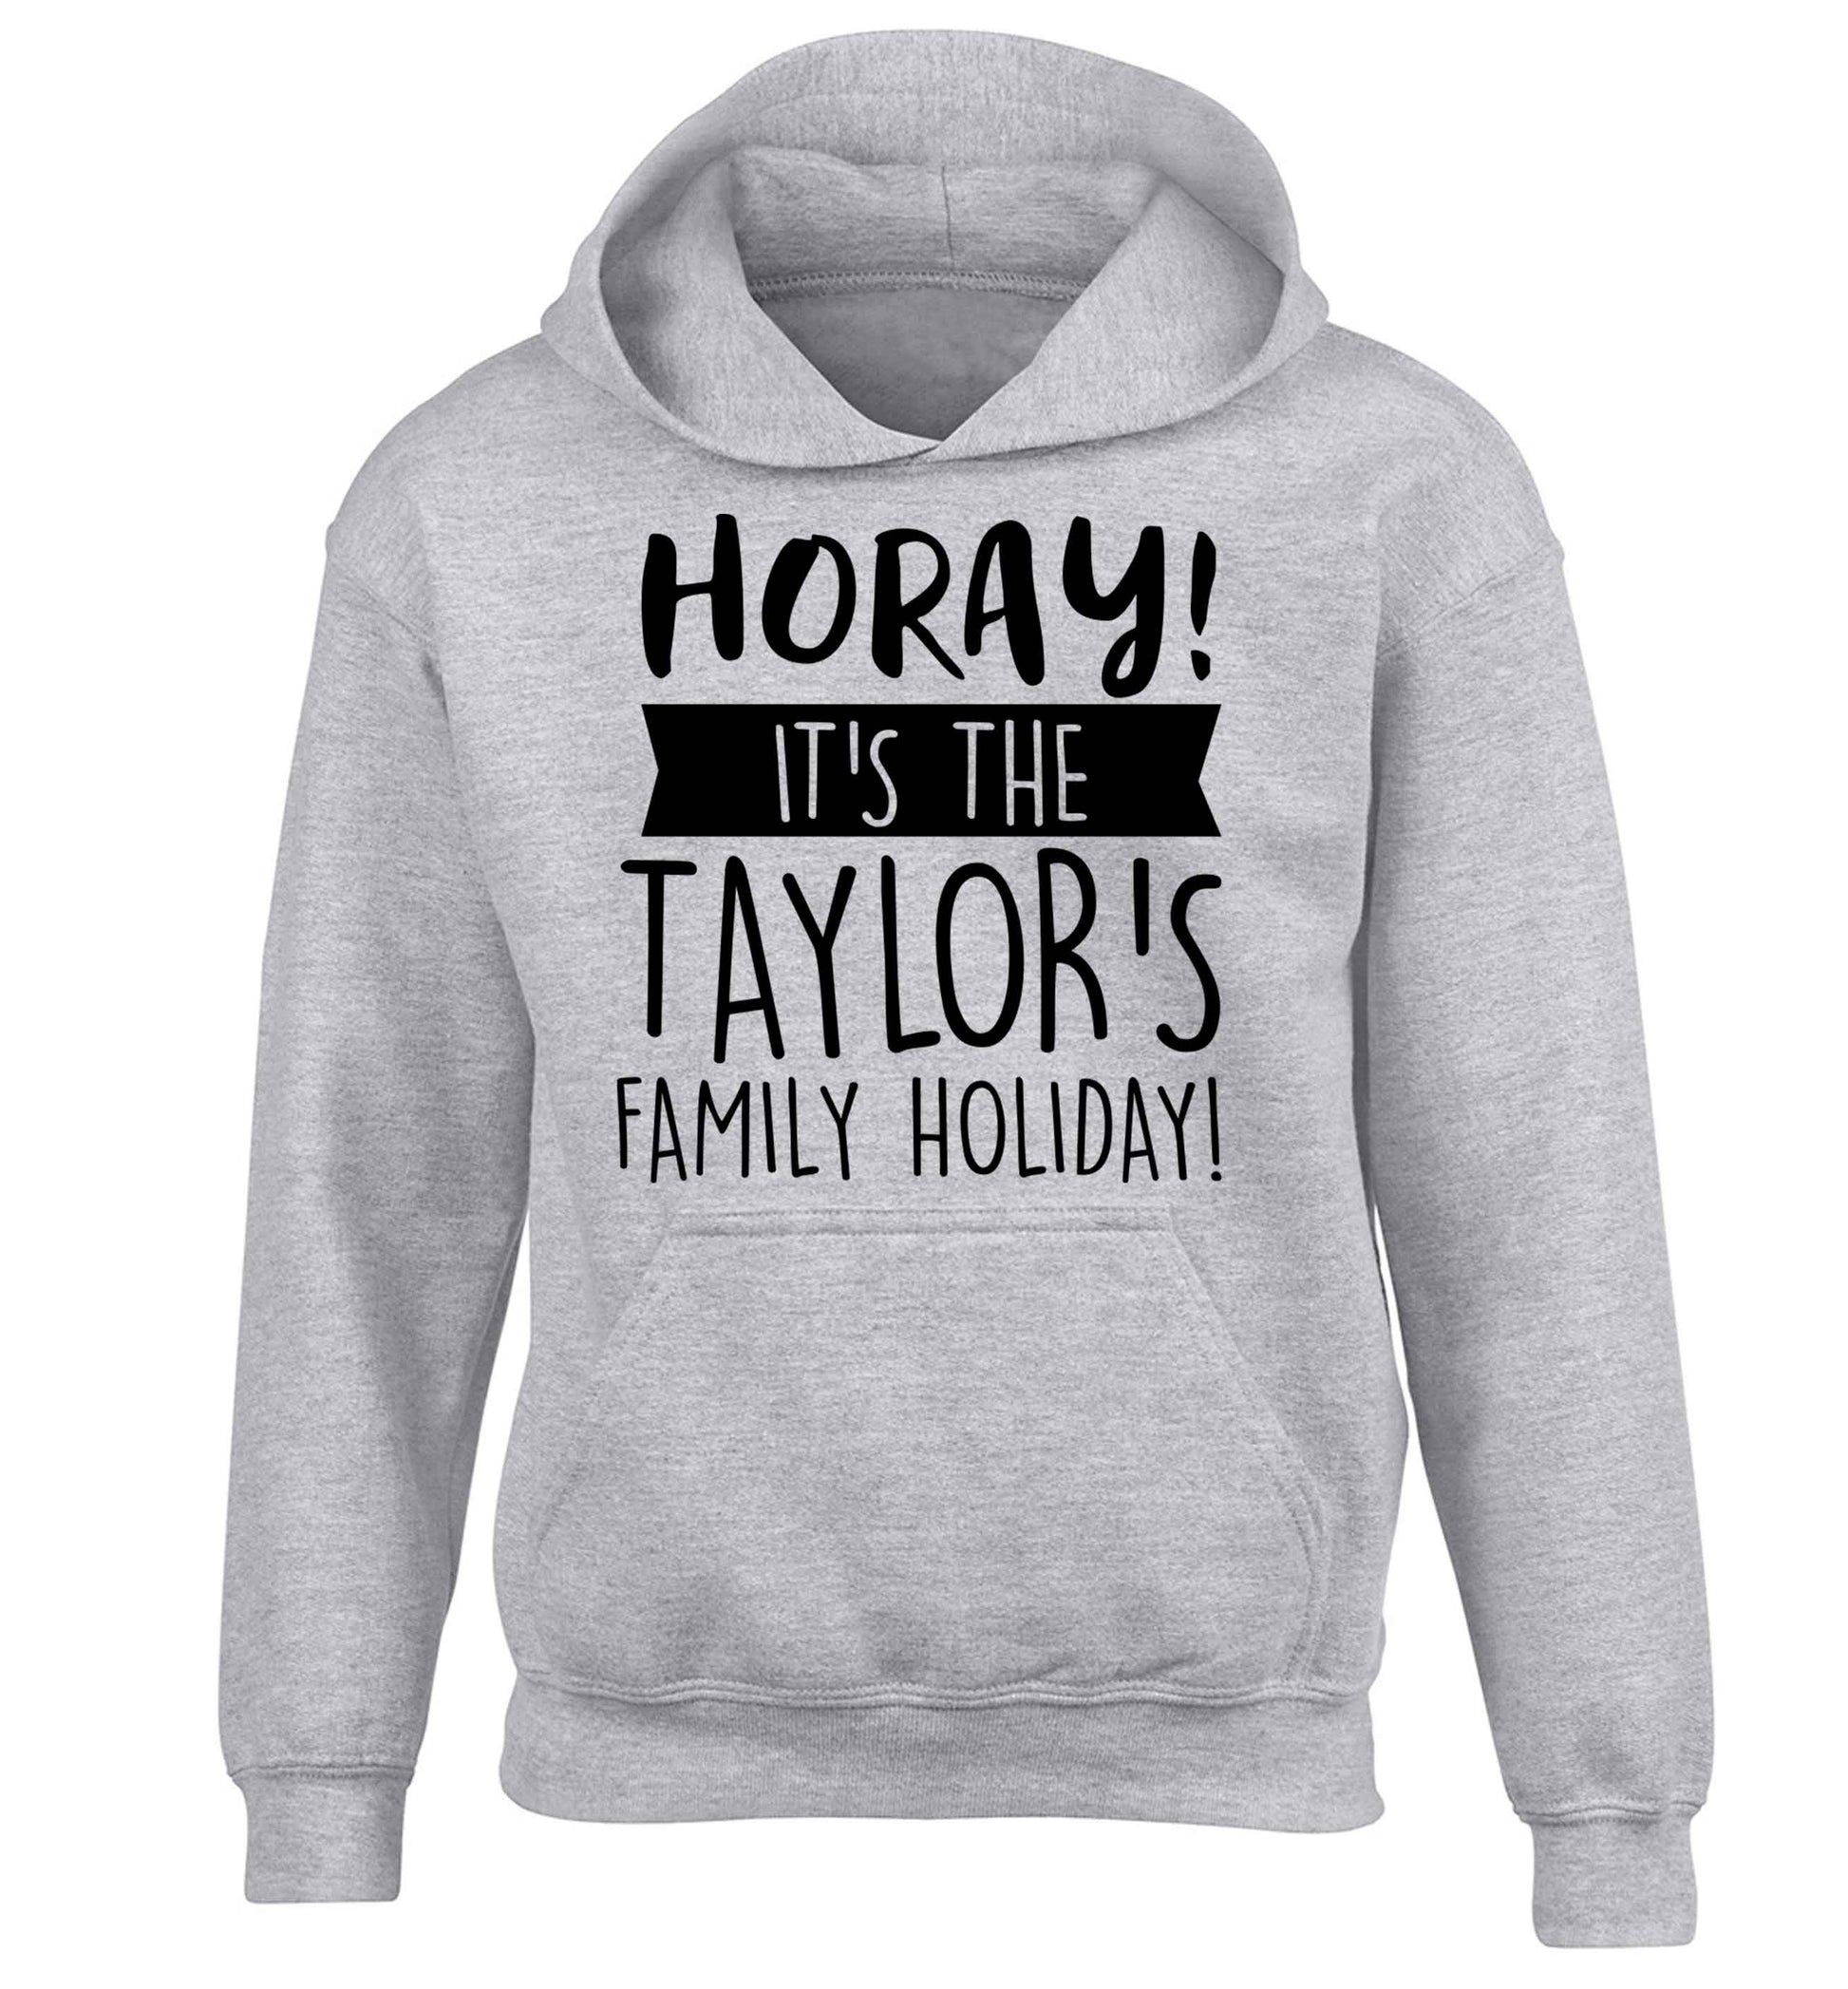 Horay it's the Taylor's family holiday! personalised item children's grey hoodie 12-13 Years